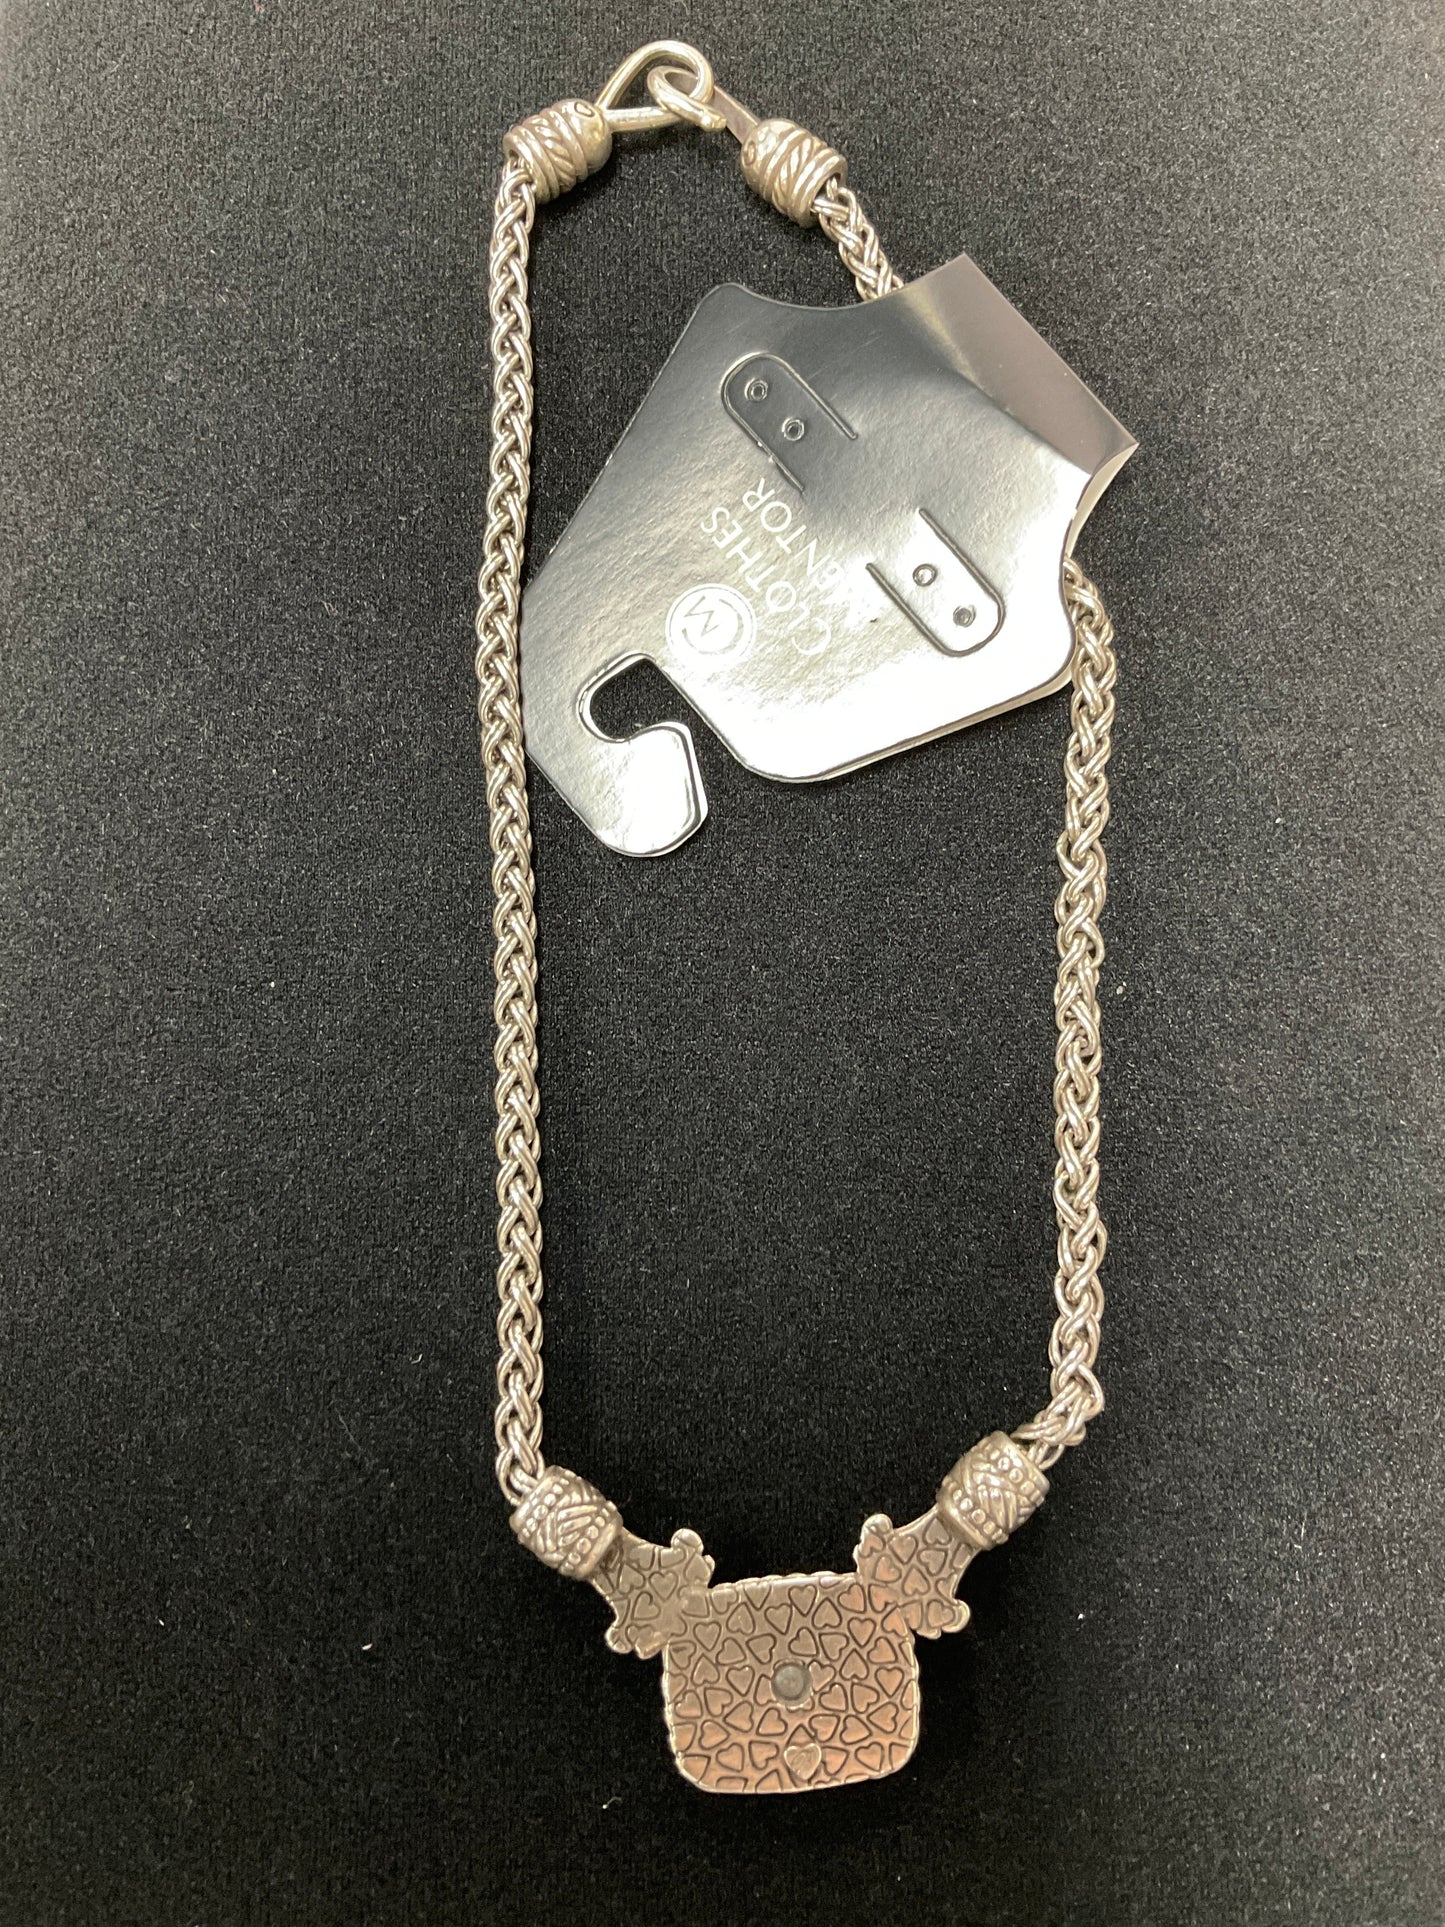 Necklace Charm By Brighton